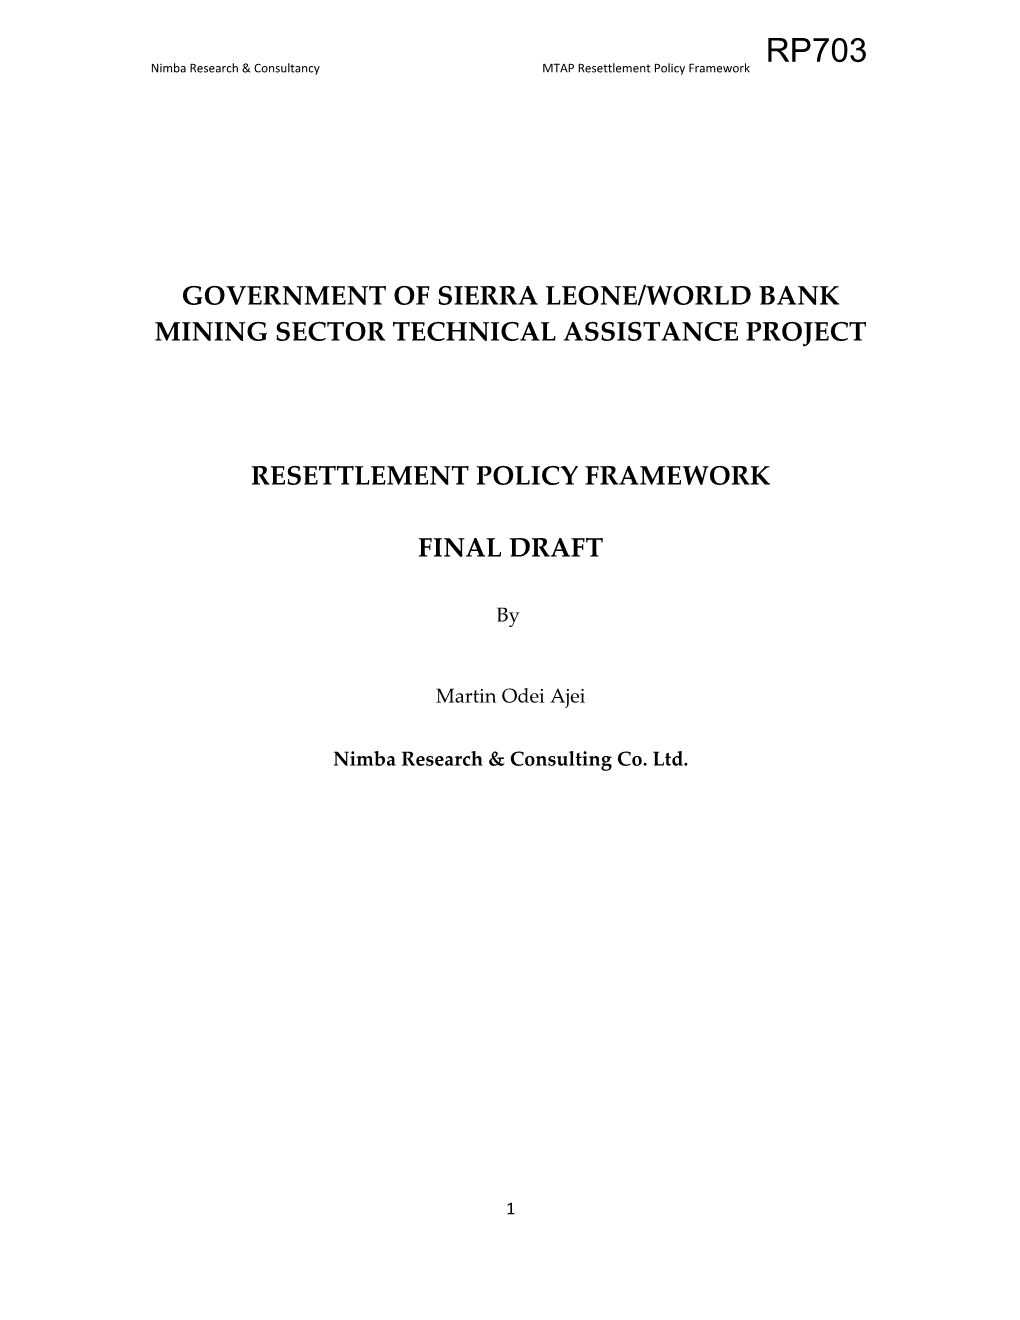 Nimba Research & Consultancy MTAP Resettlement Policy Framework